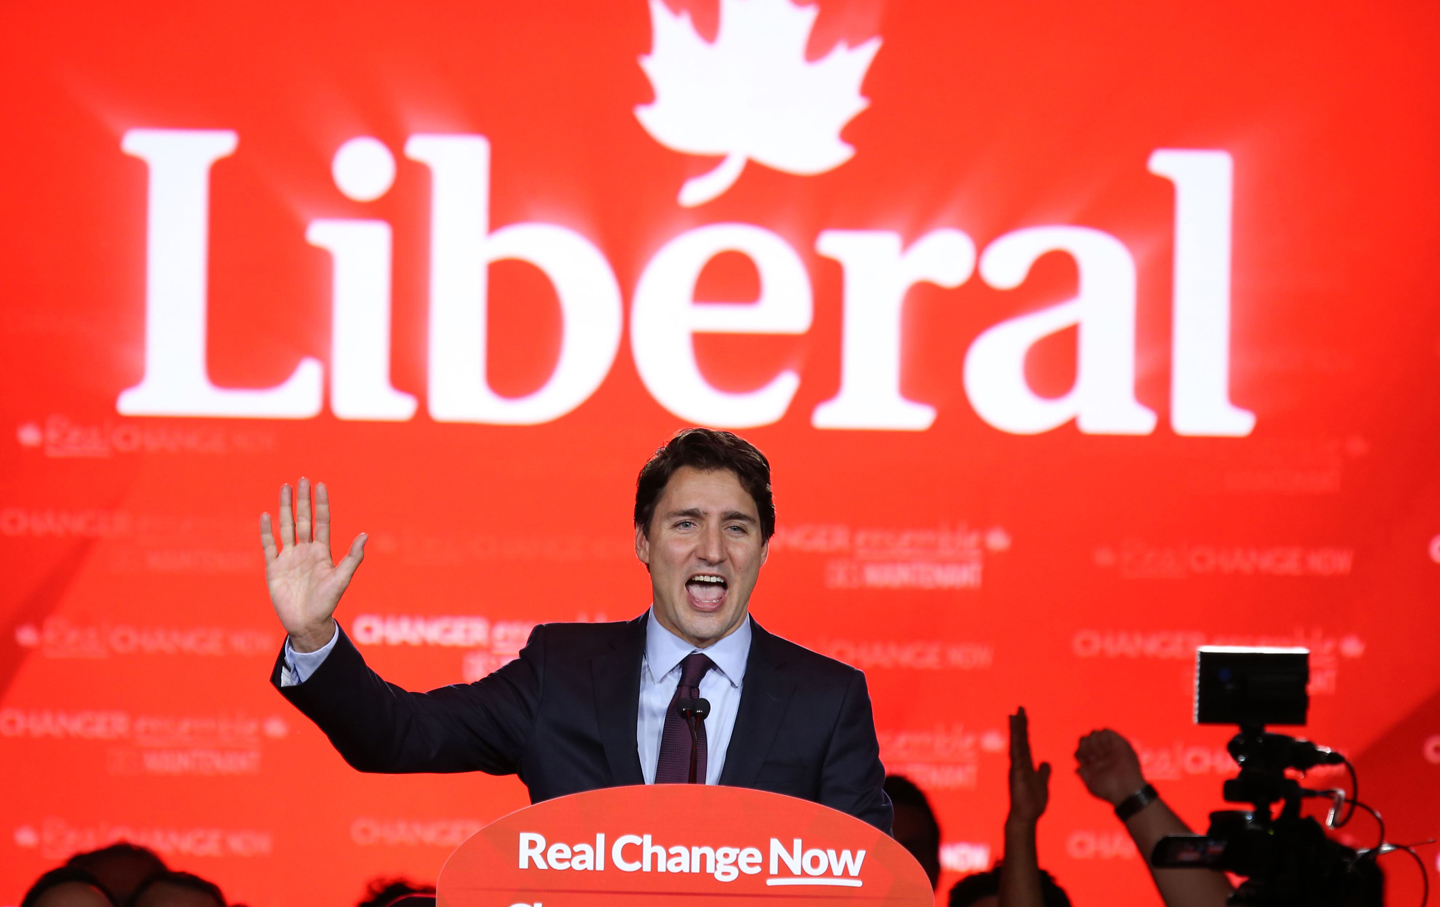 Liberal Party leader Justin Trudeau gives his victory speech after Canada's federal election in Montreal